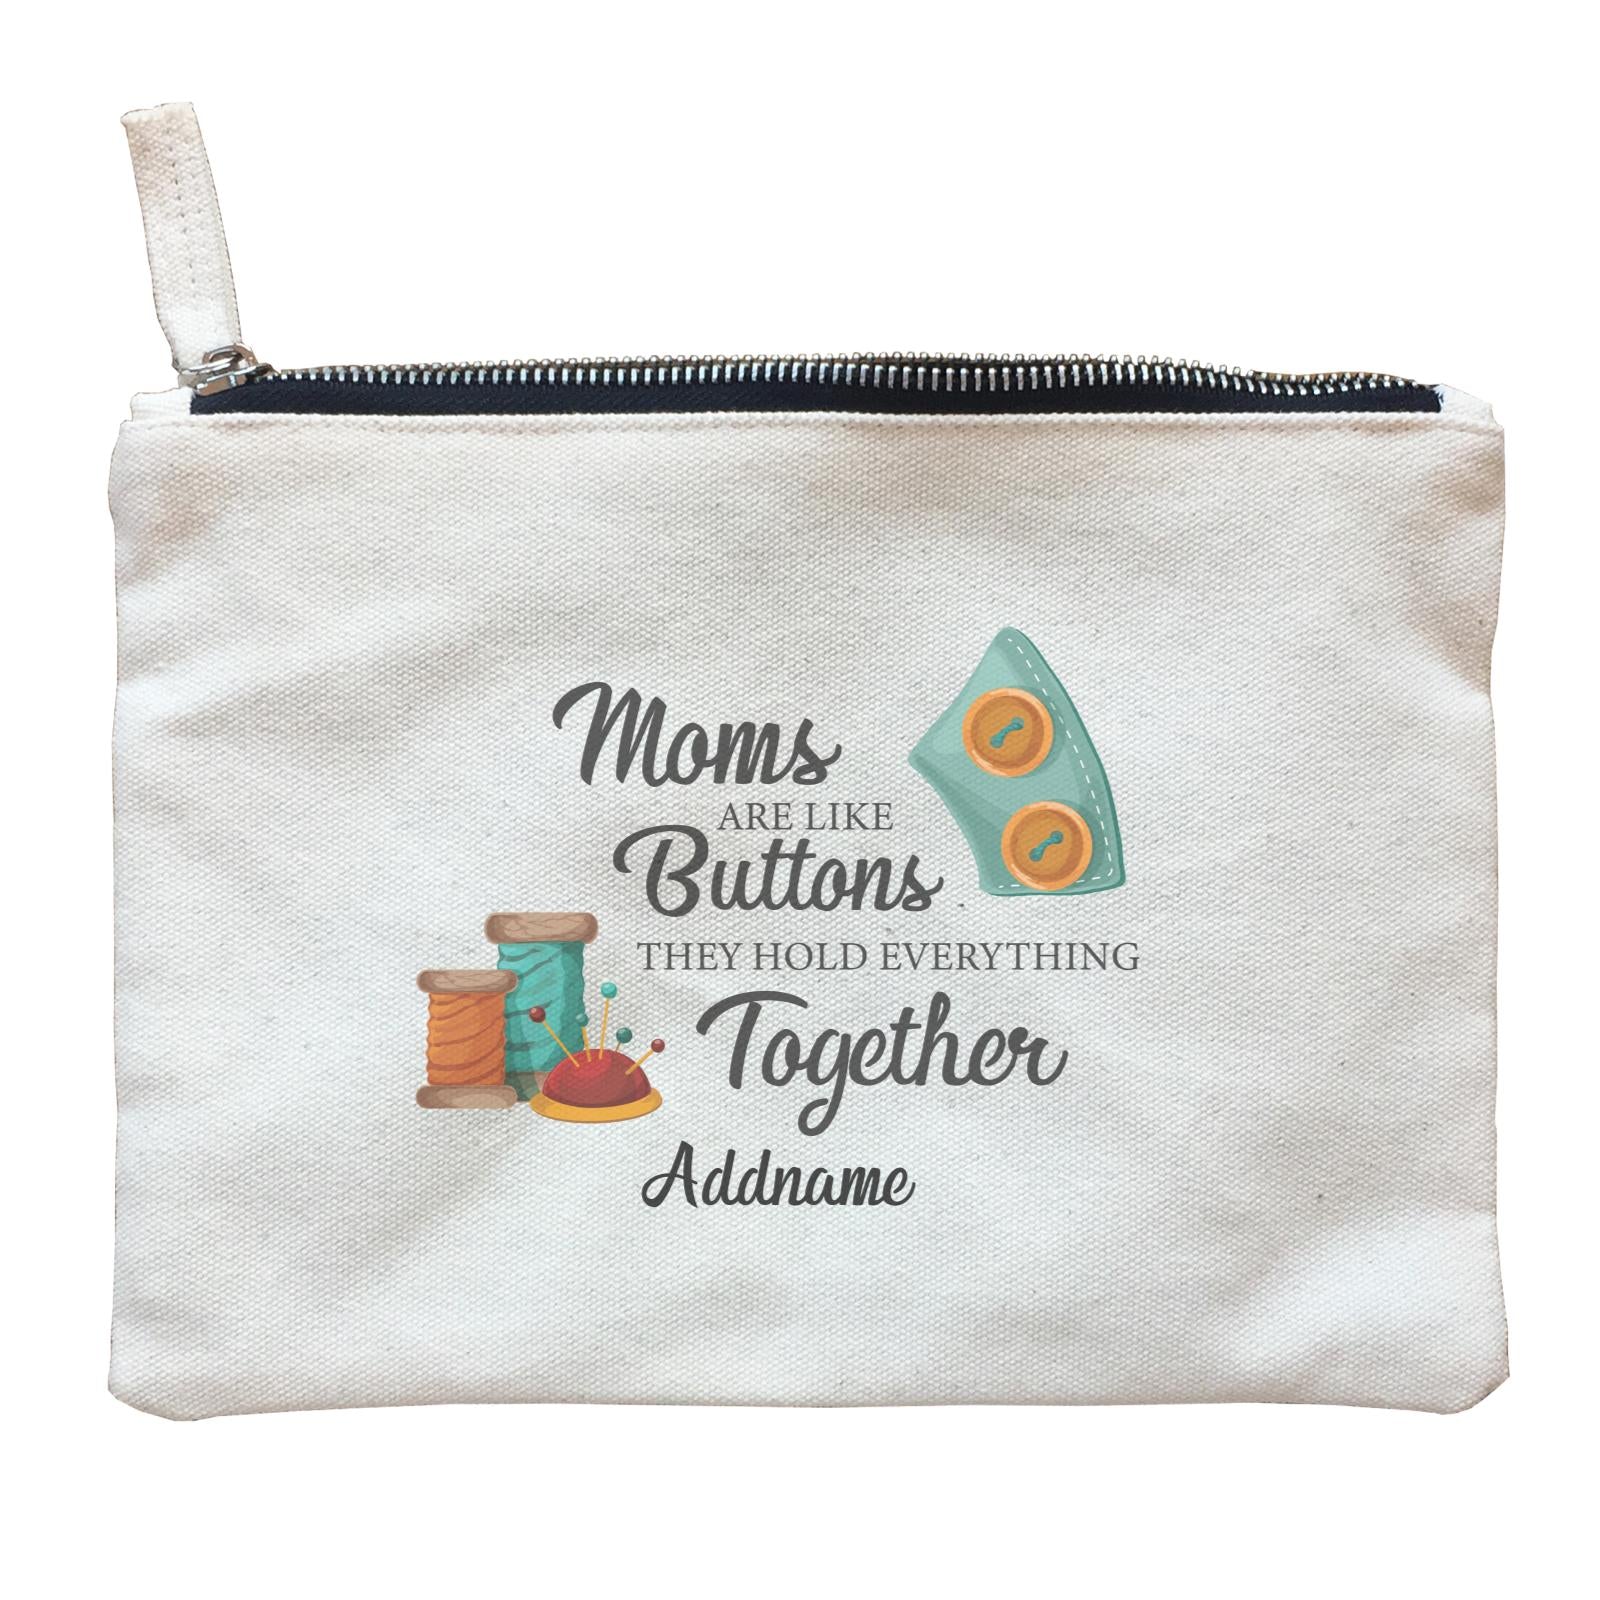 Sweet Mom Quotes 2 Moms Are Like Buttons They Hold Everything Together Addname Accessories Zipper Pouch